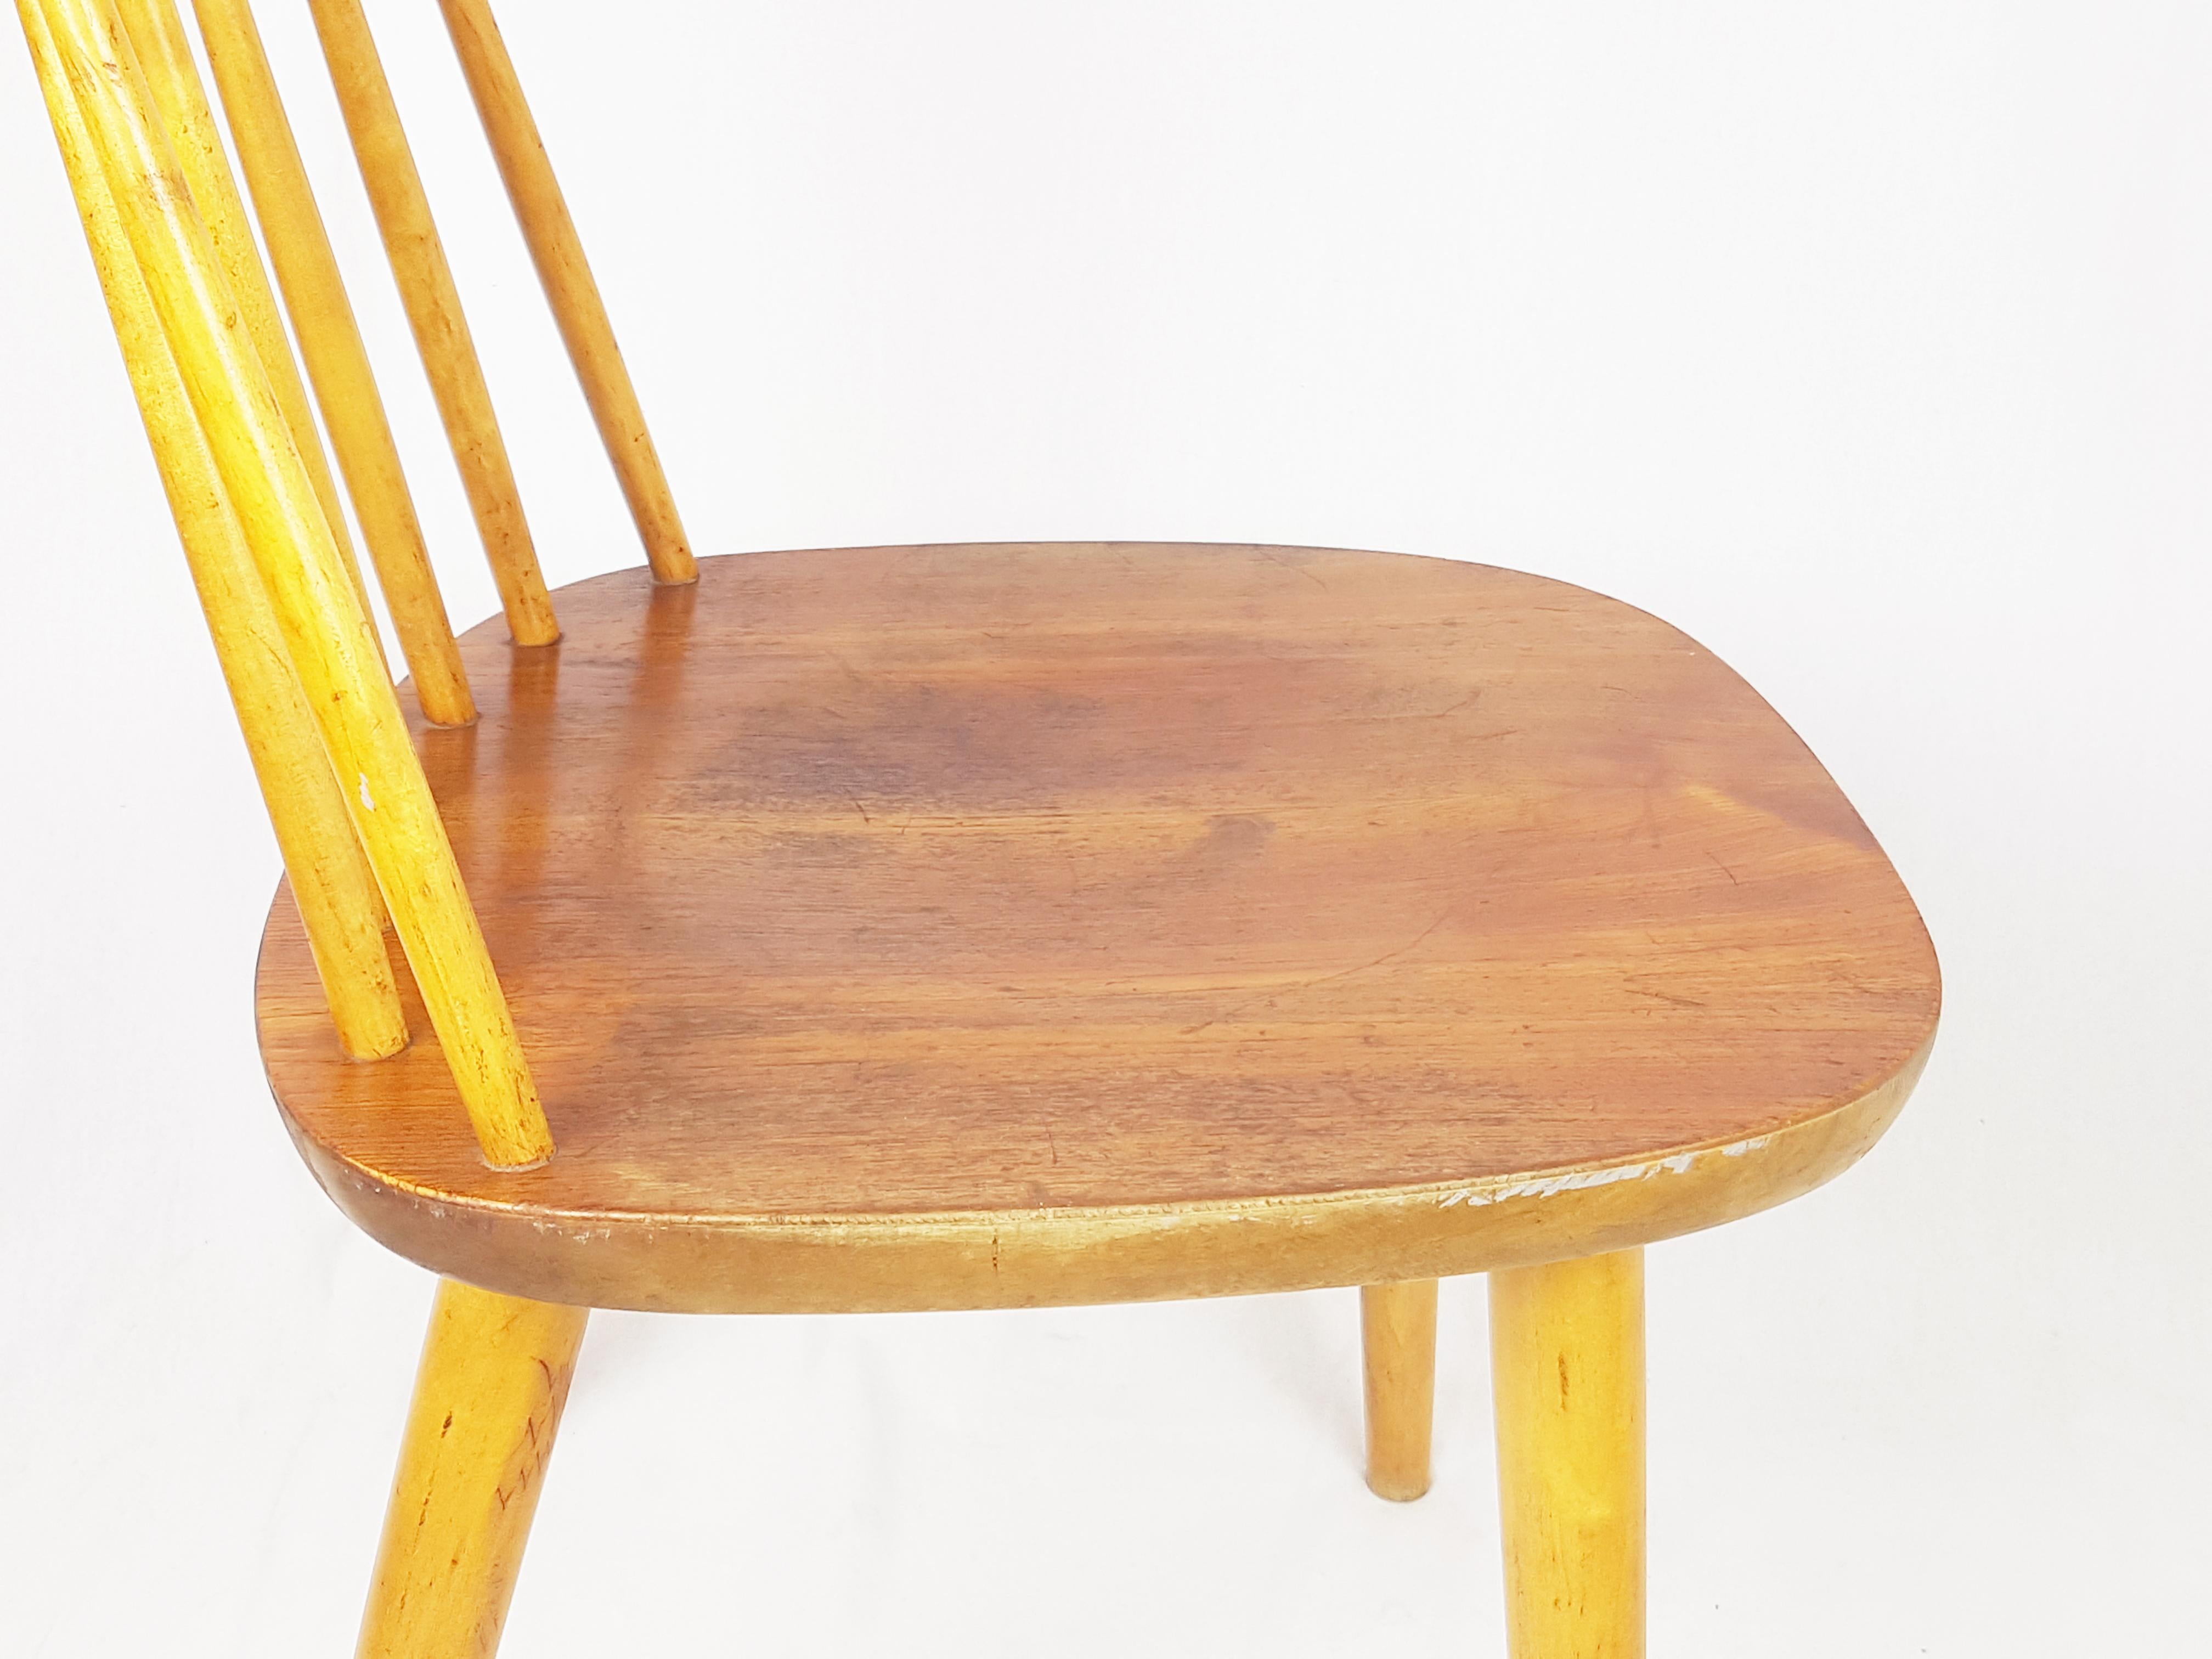 20th Century Wooden Mid-Century Modern Pinocchio Chair by Yngve Ekström for Stolab For Sale